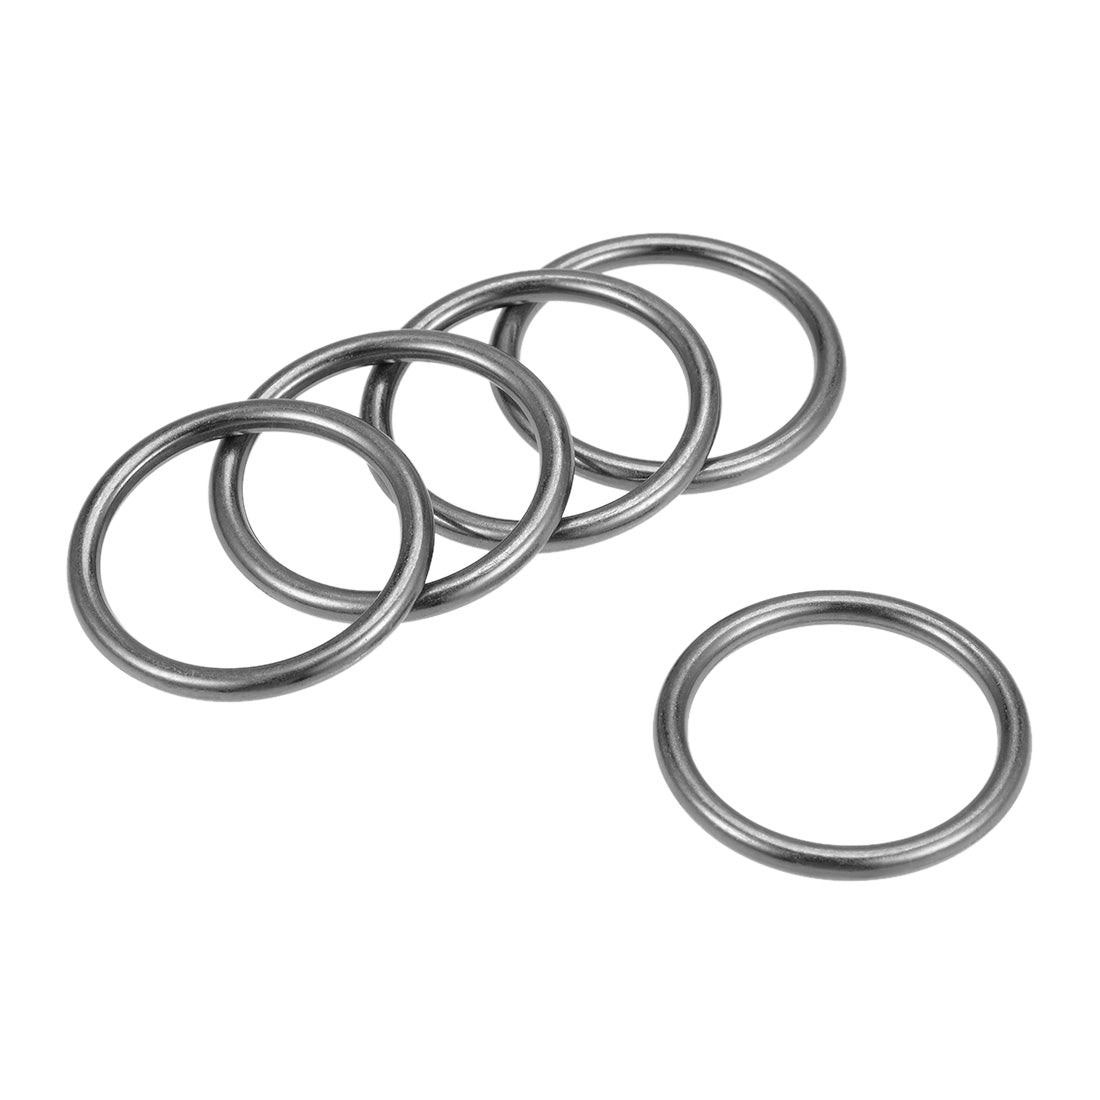 uxcell Uxcell O Ring Buckle 25mm(1") ID 3mm Thickness Zinc Alloy O-Rings for Hardware Bags Belts Craft DIY Accessories, Black 5pcs